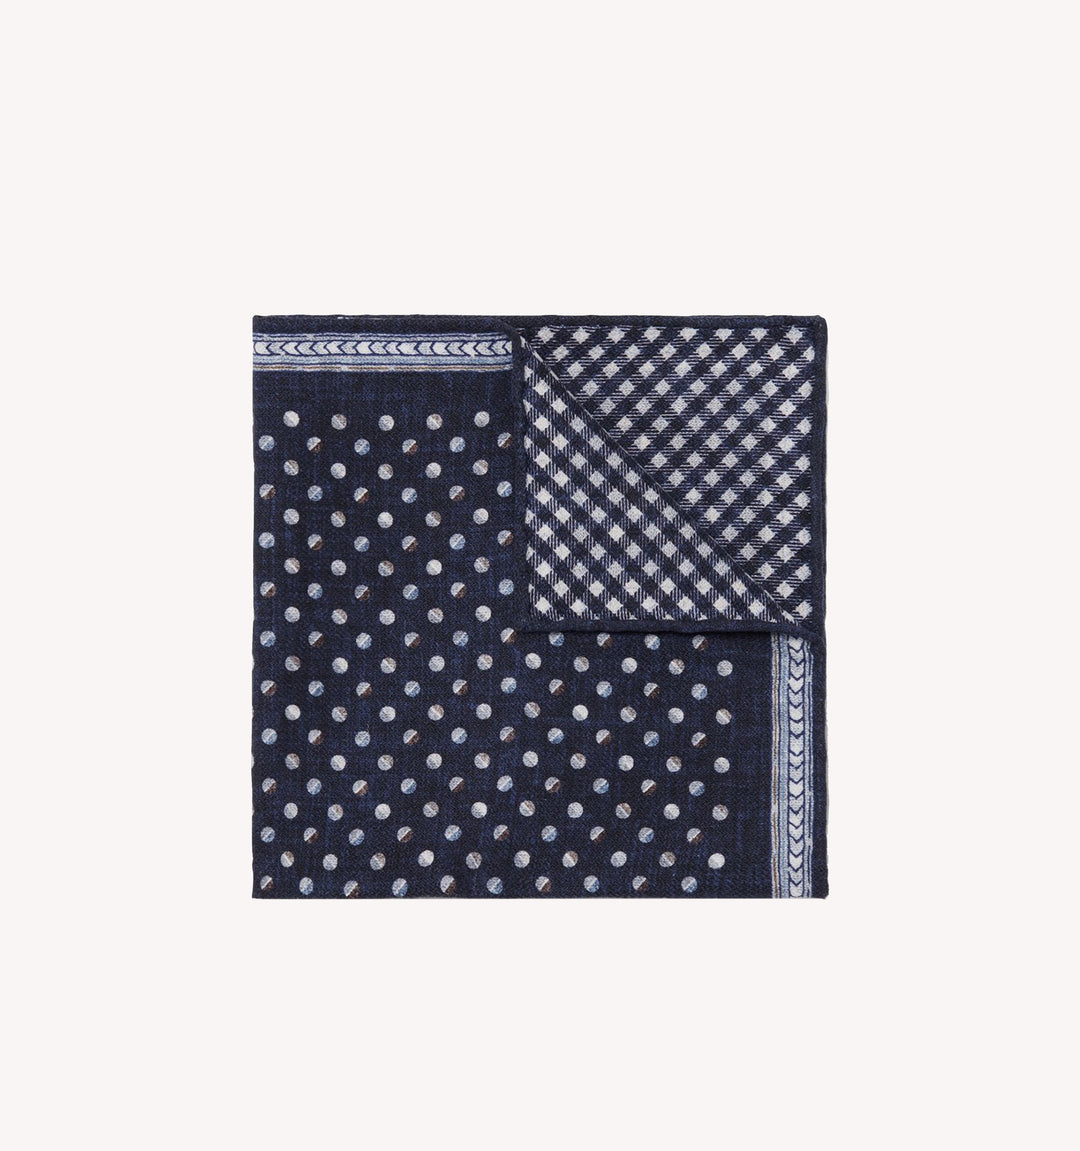 Brunello Cucinelli Dotted Reversible Pocket Square in Navy